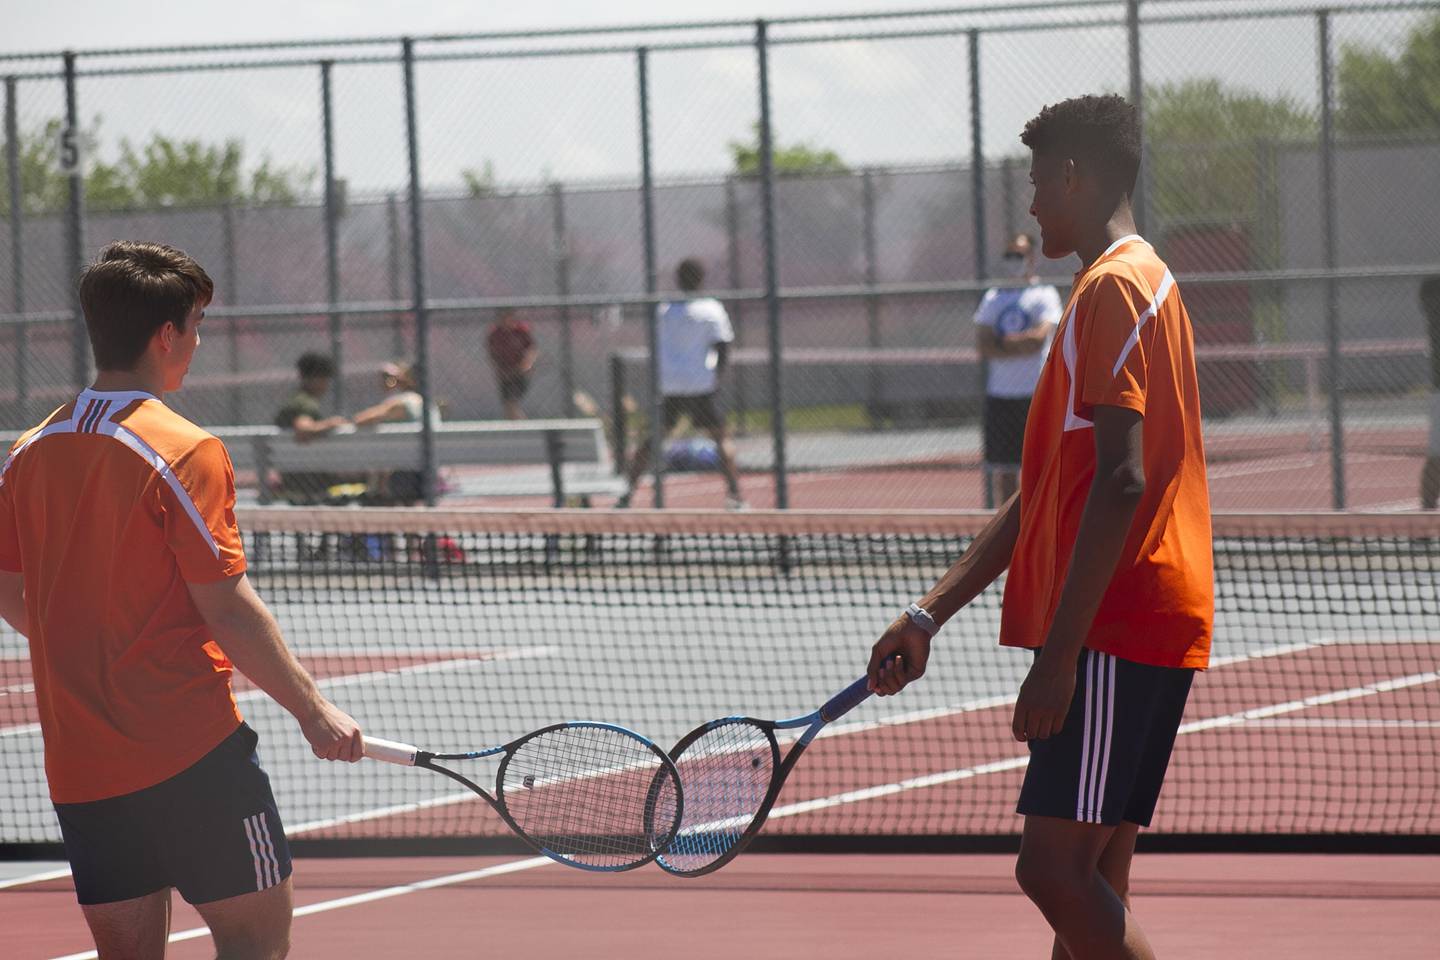 Oswego doubles pair Barry King (right) and Stefan Ninic (left) congratulate each other after a point during boys' conference tennis May 26 at Plainfield North High School.